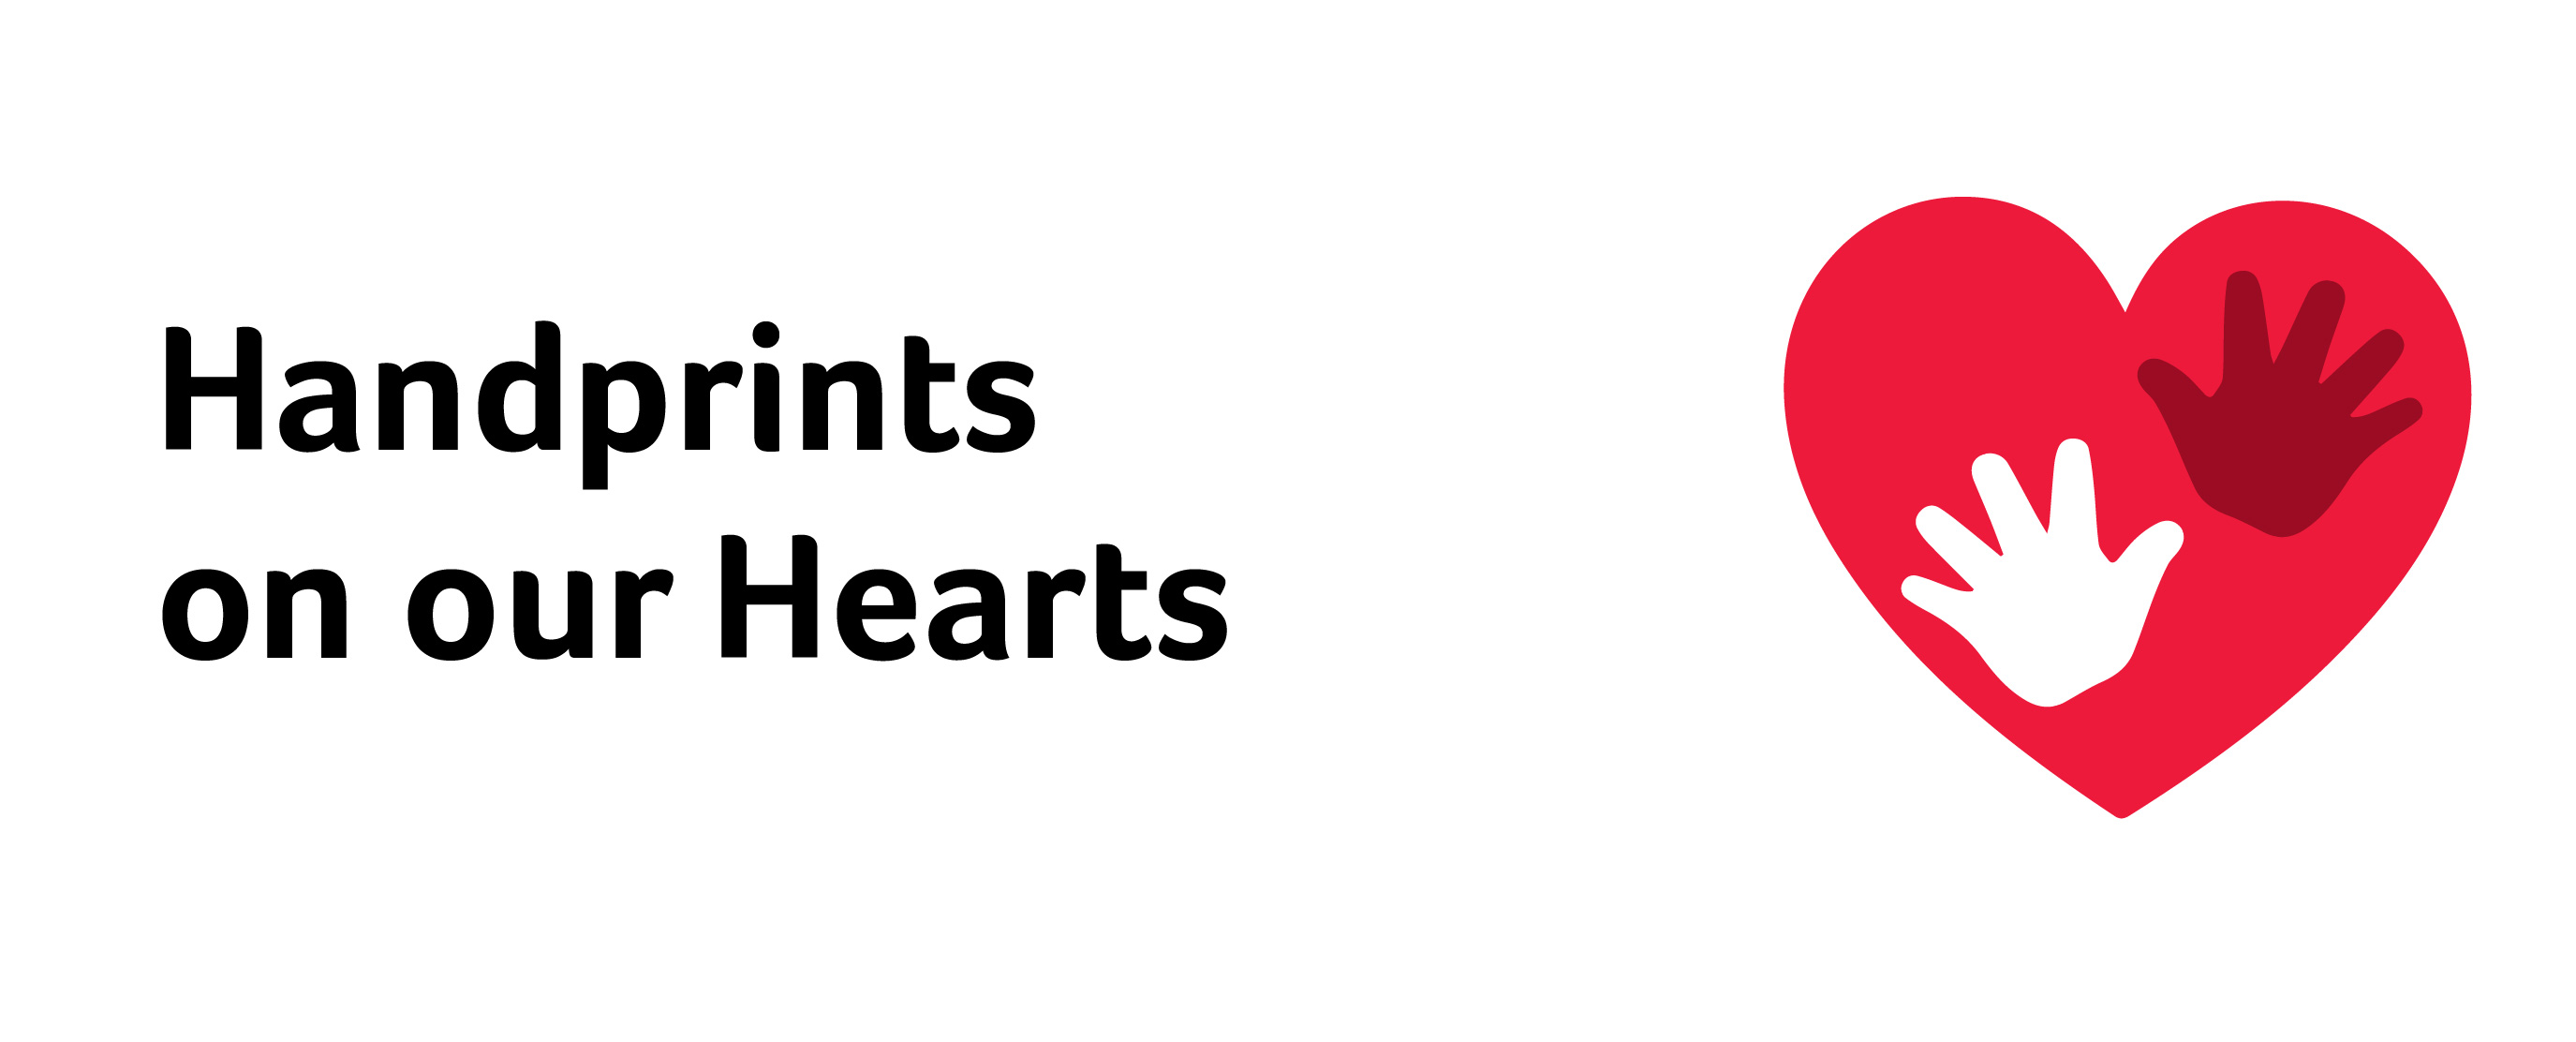 Handprints on Our Hearts